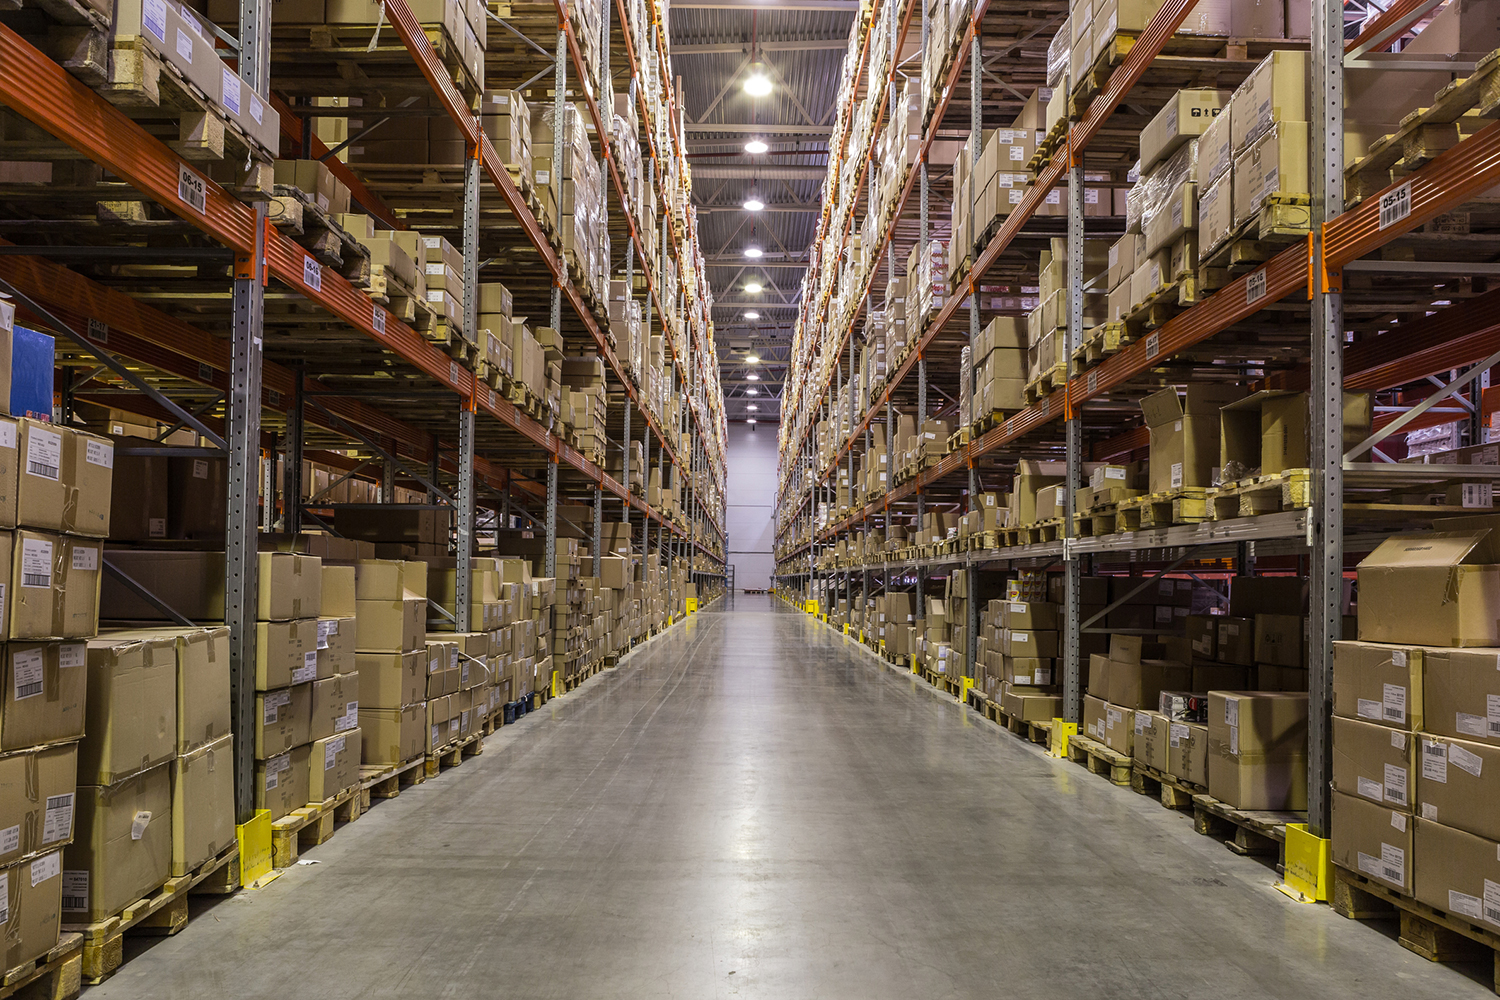 Your Storage, Your World: How to Make Warehouse Storage Work for You